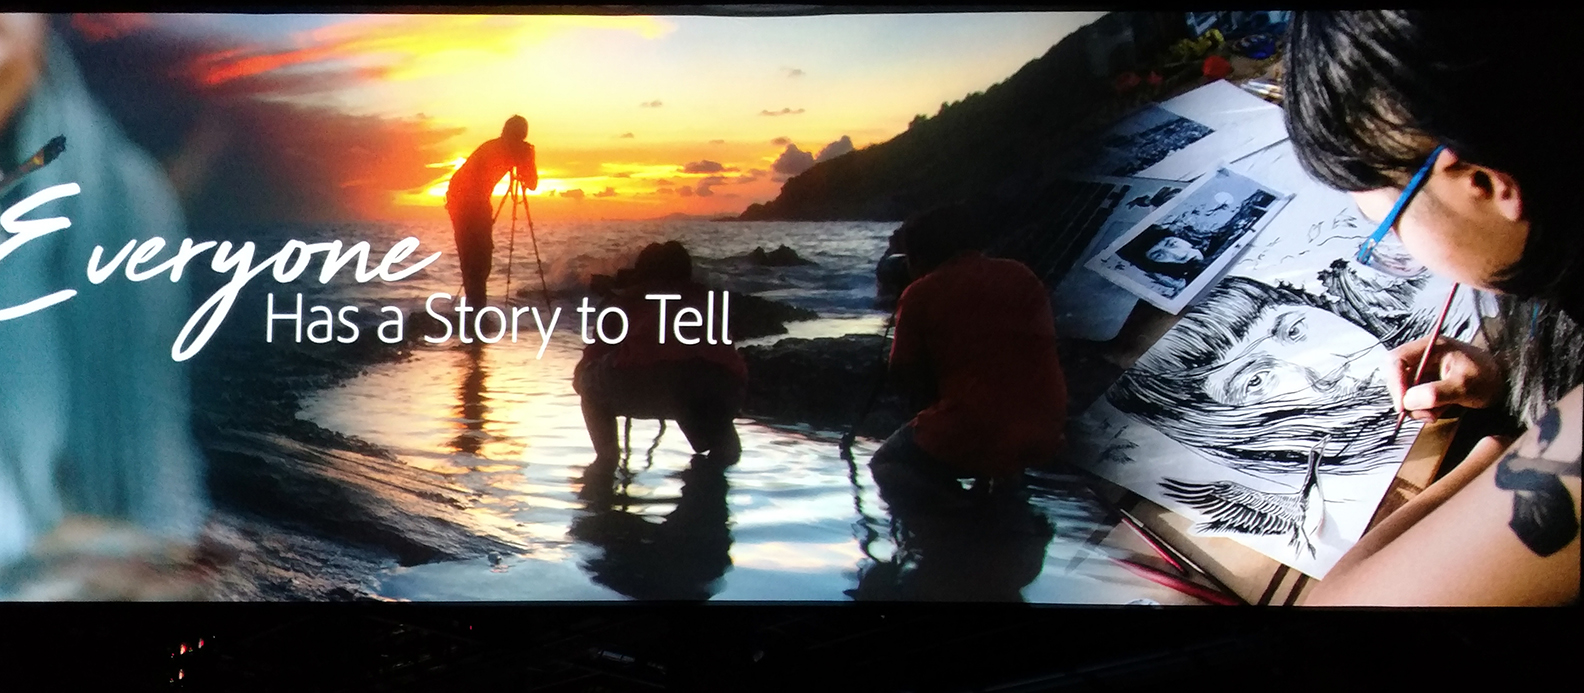 "Everyone has a story to tell" graphic with a sunset, someone taking a photo and someone drawing